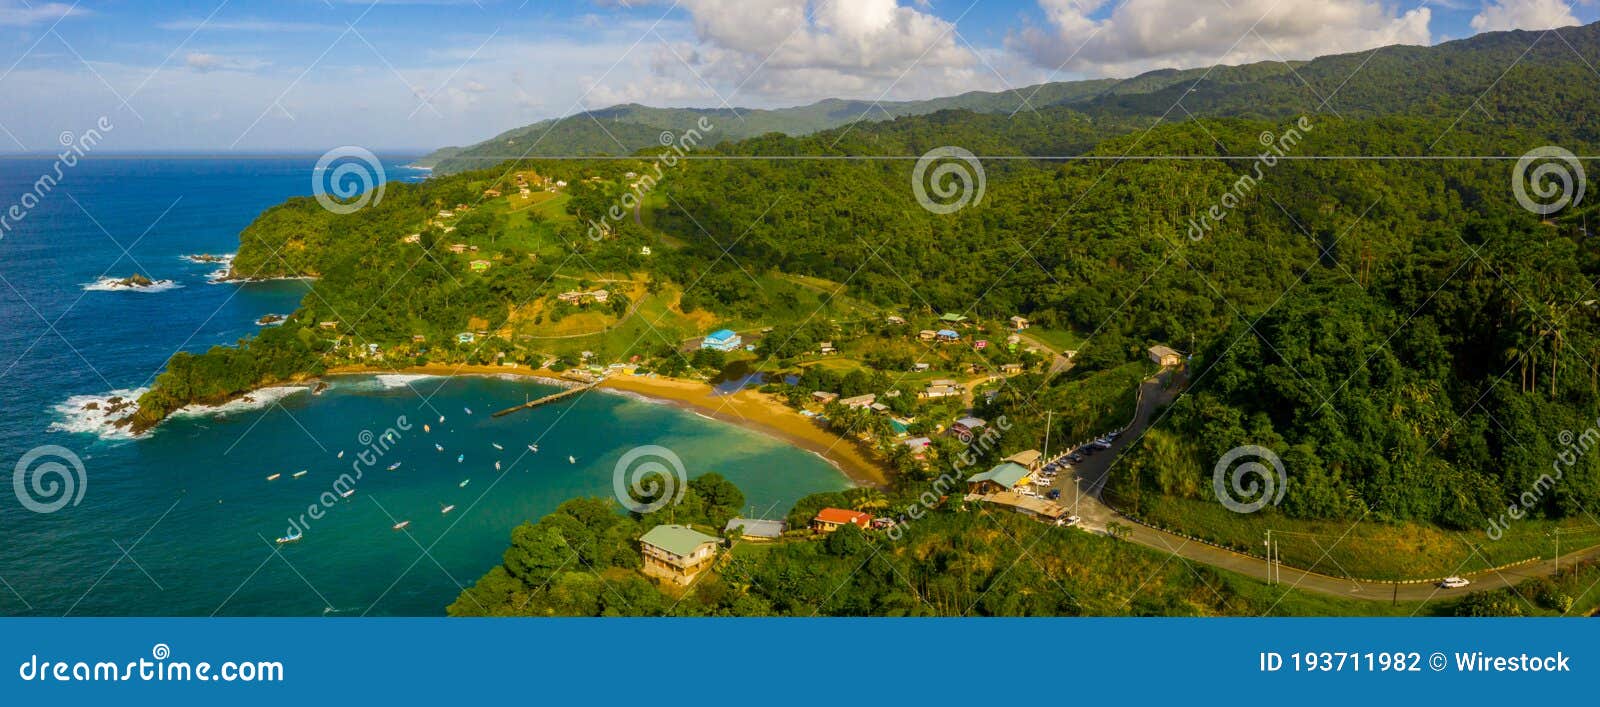 panoramic aerial view of the tobago island from above